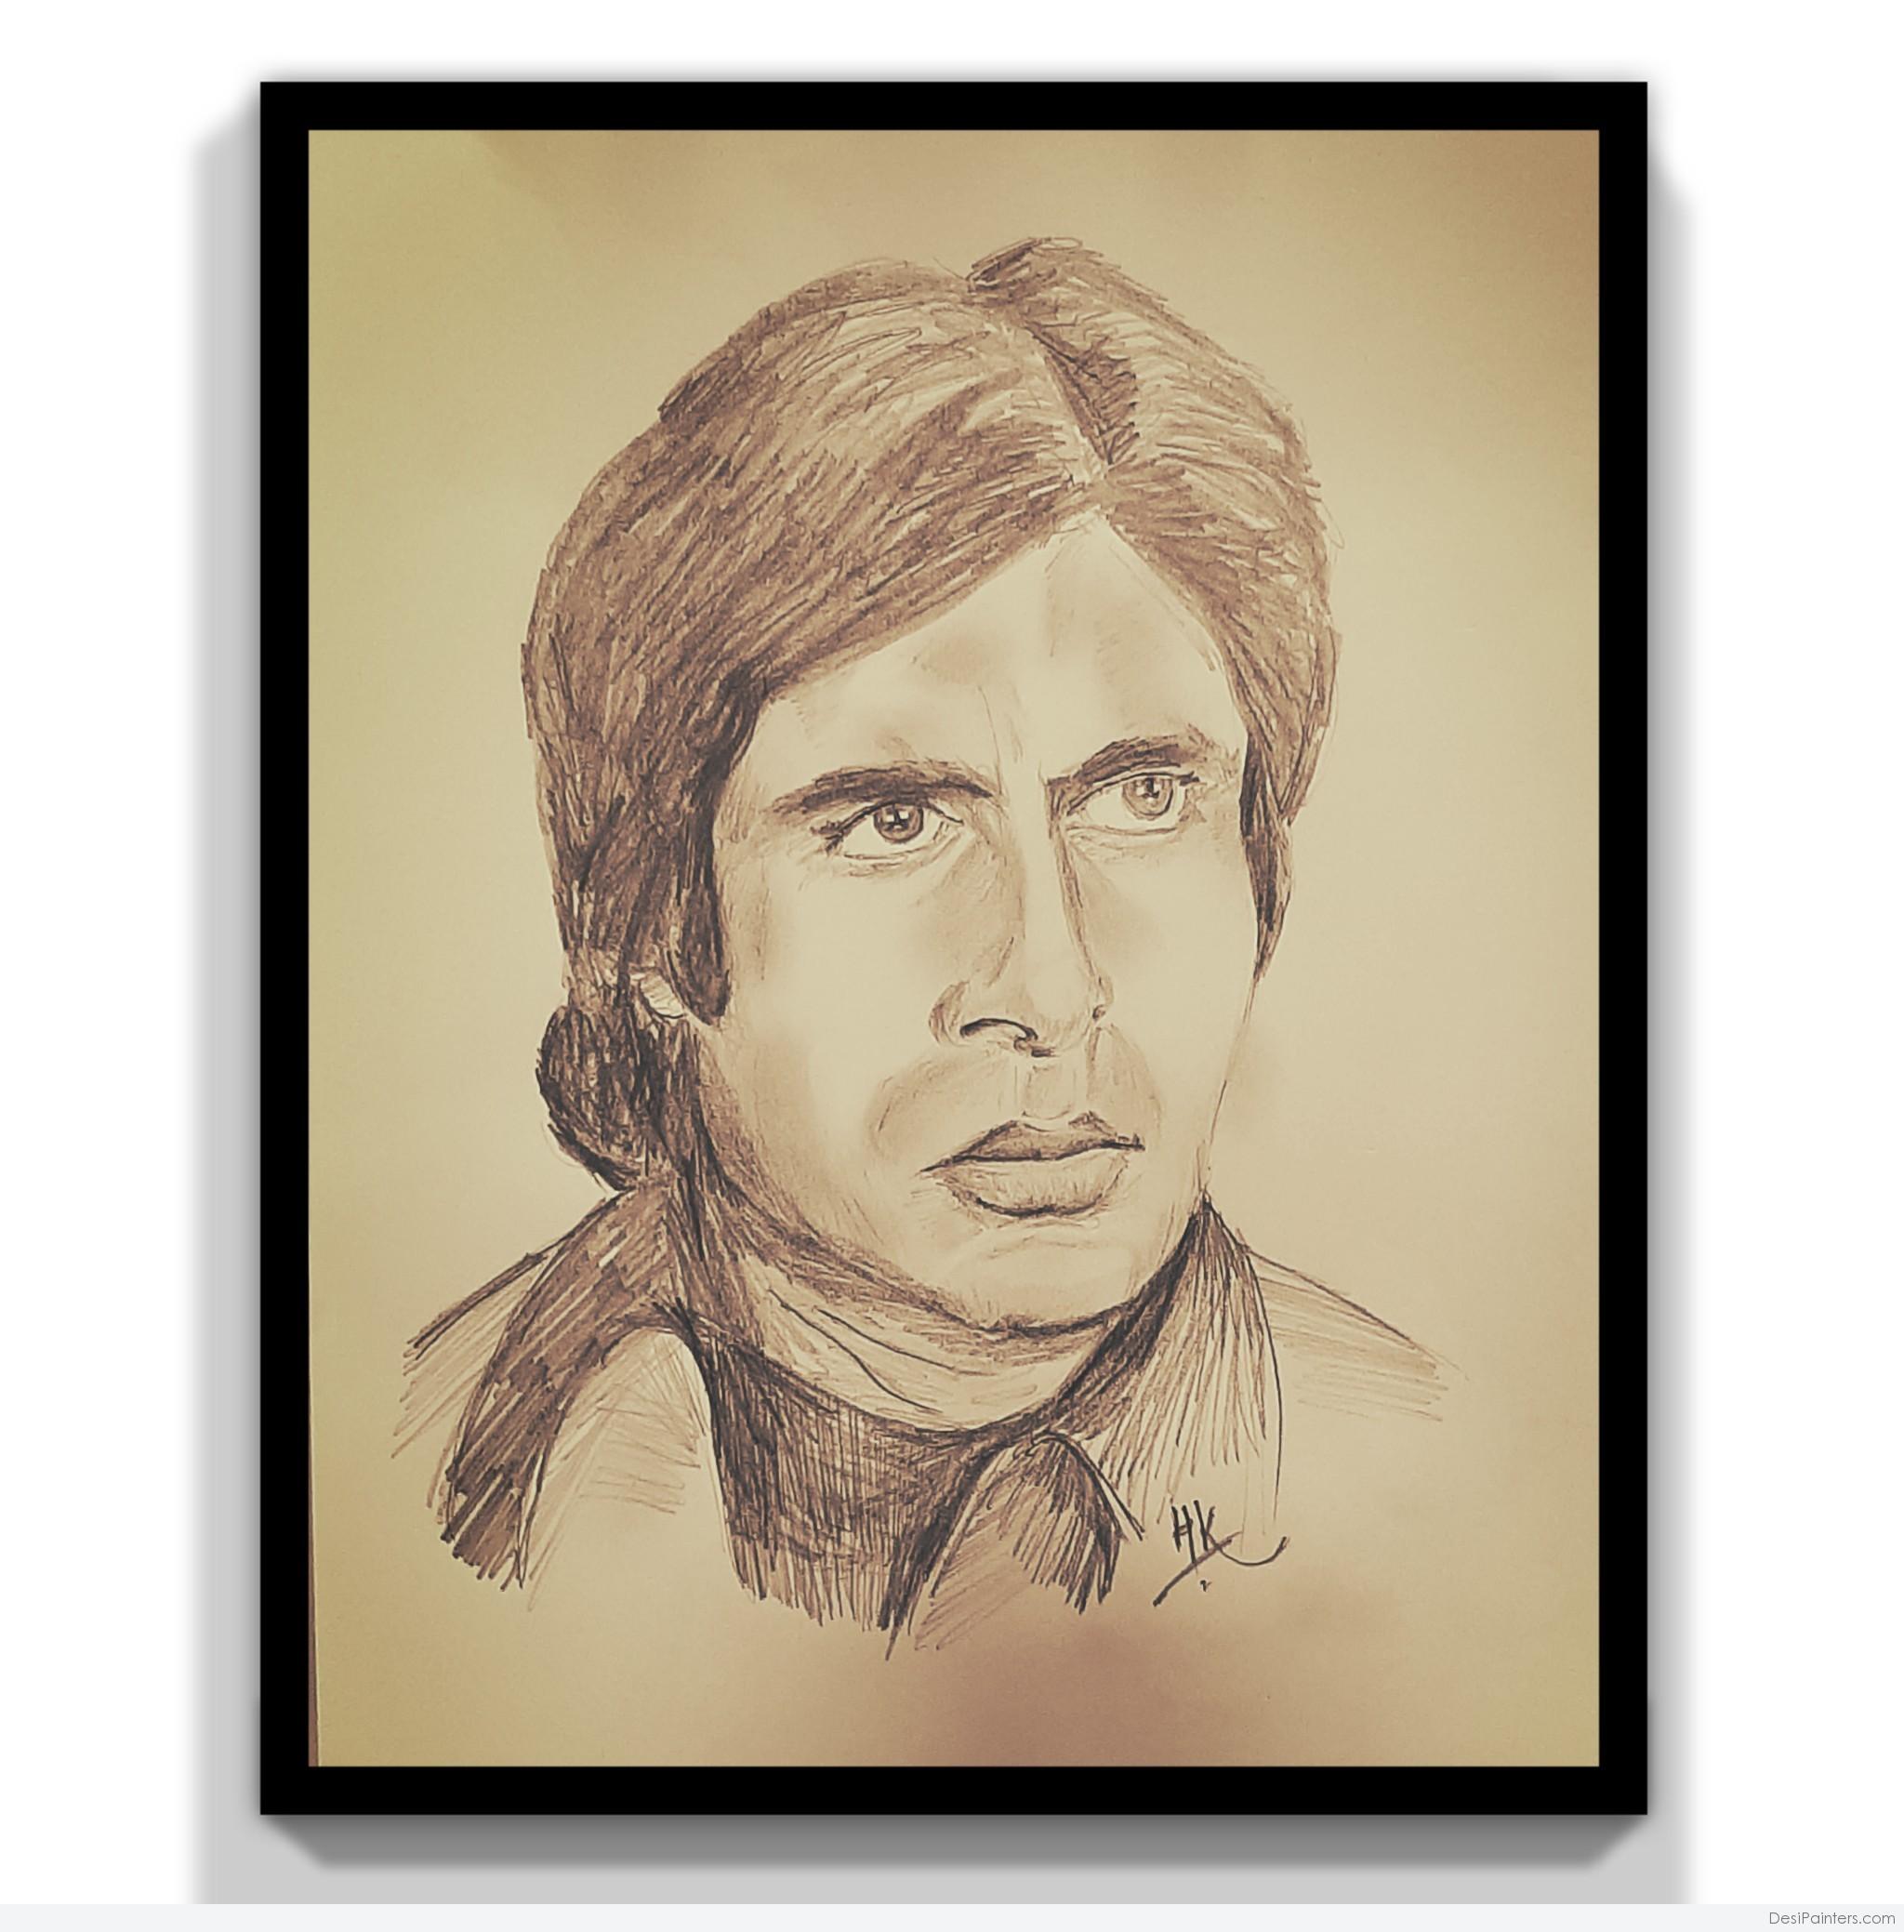 Portrait Sketch of Mr. Amitabh Bachchan ( Mega Star of Indian Bollywood  Movies ) - Famous celebrity sketch | OpenSea